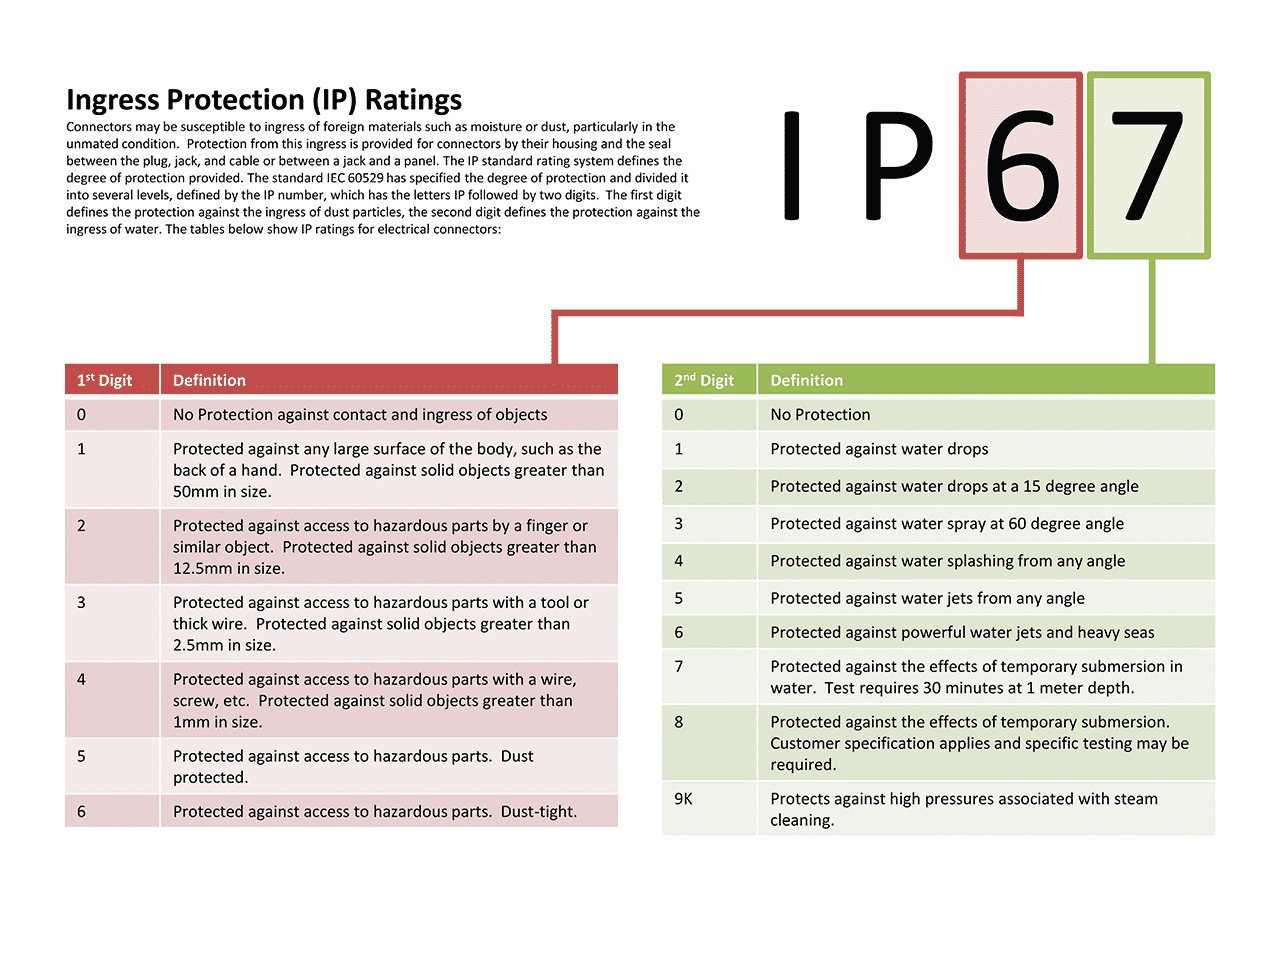 IP Ratings explained